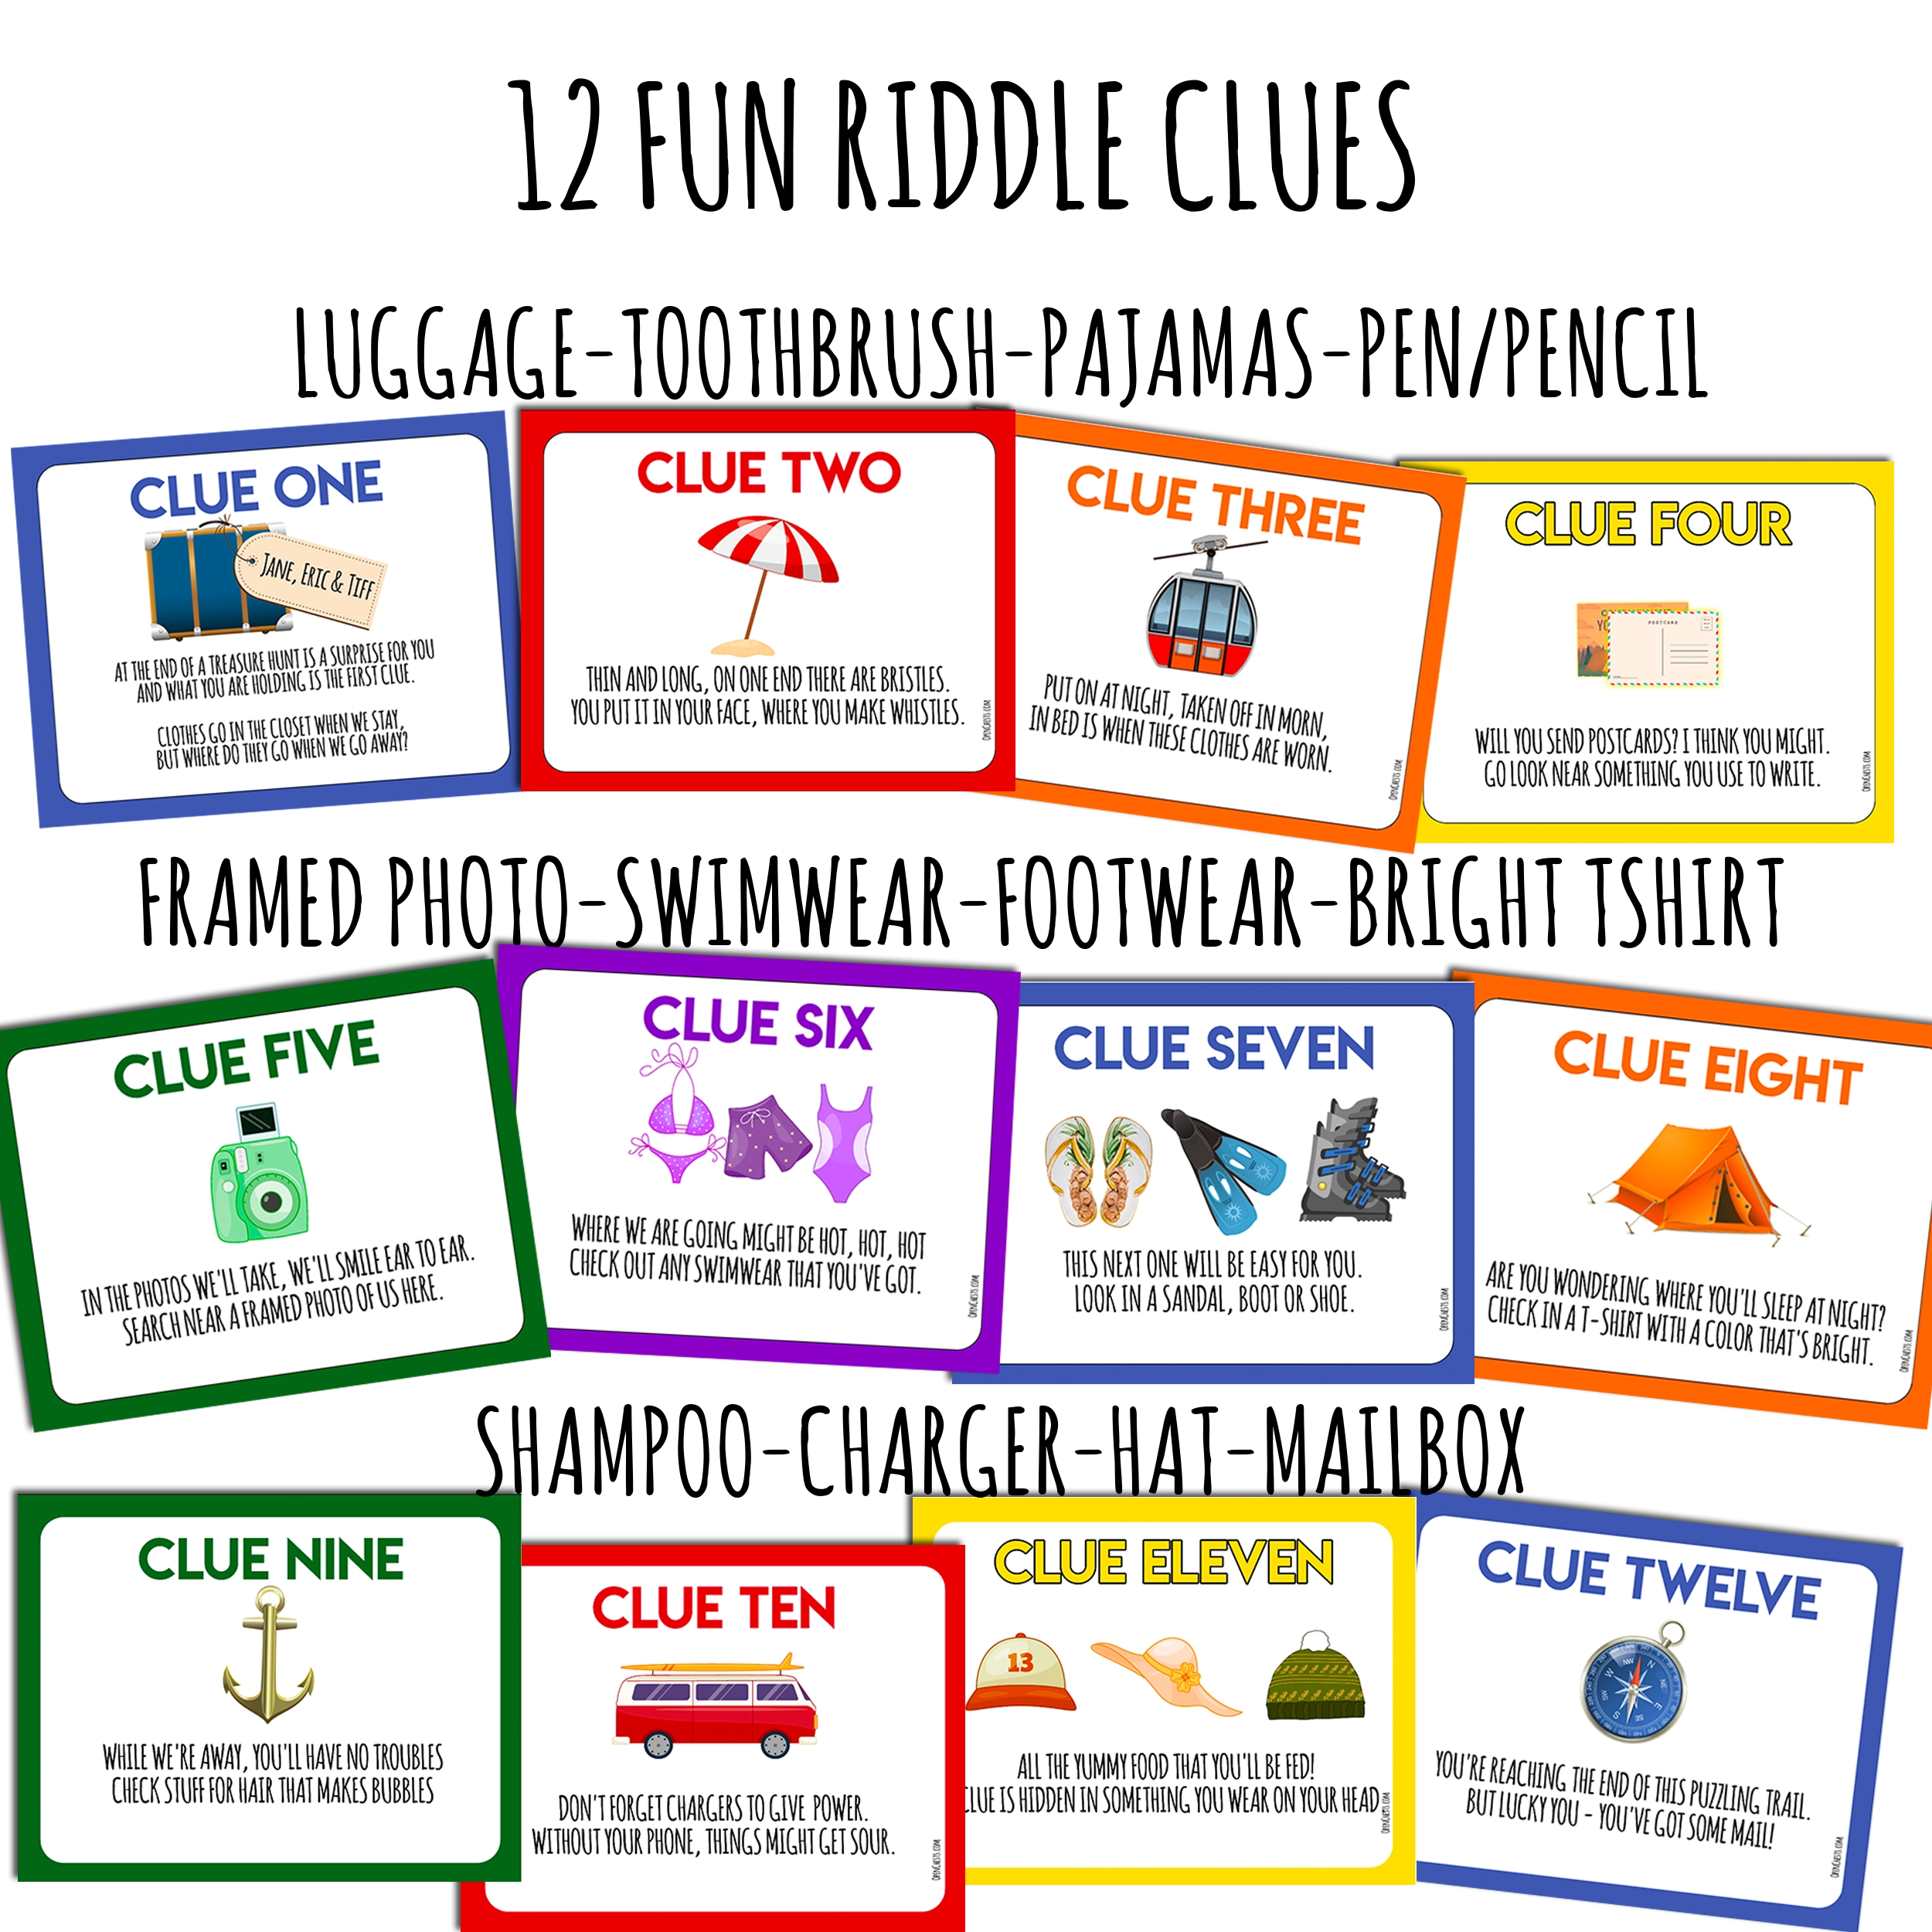 Fun Vacation Reveal Treasure Hunt Clues printable - Surprise Trip - Open Chests